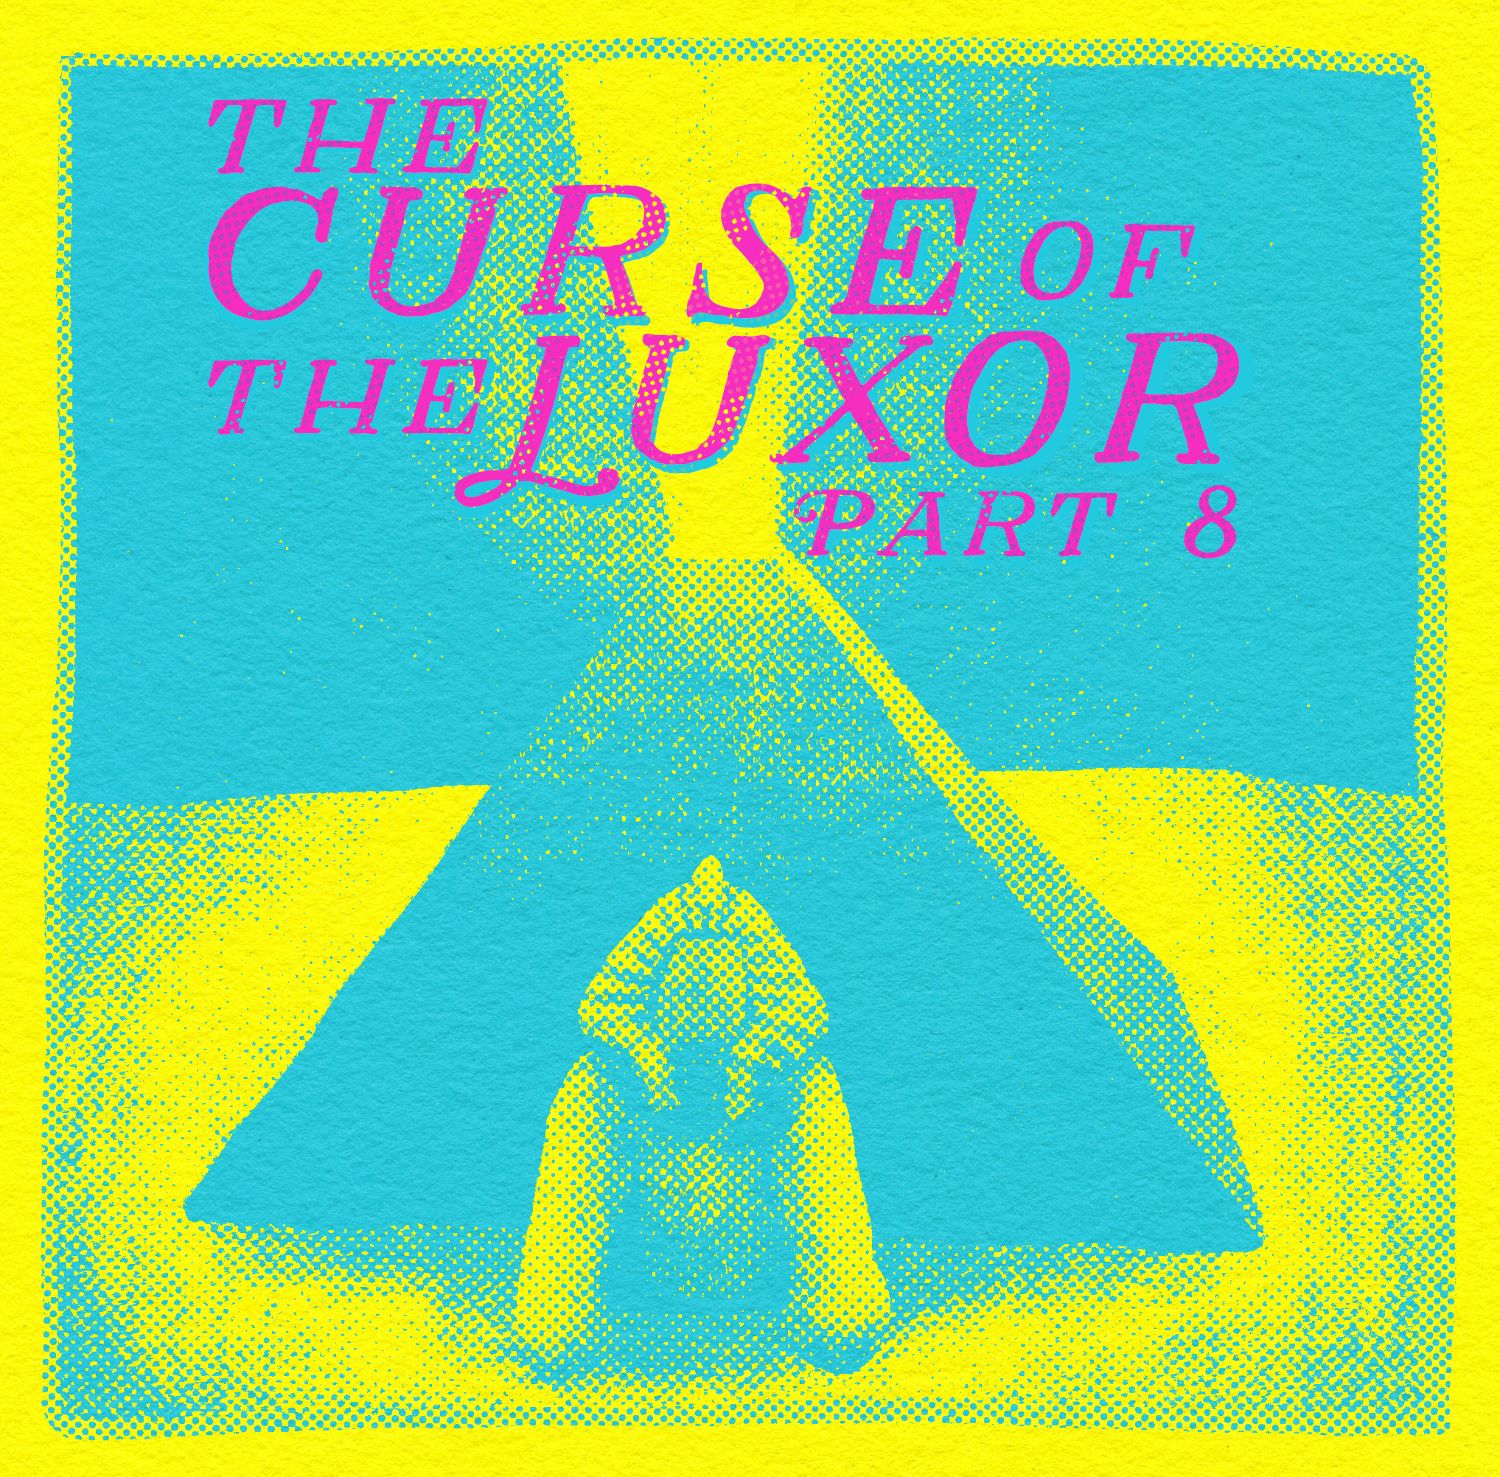 a halftone illustration of the Luxor hotel with the words The Curse of The Luxor Part 8